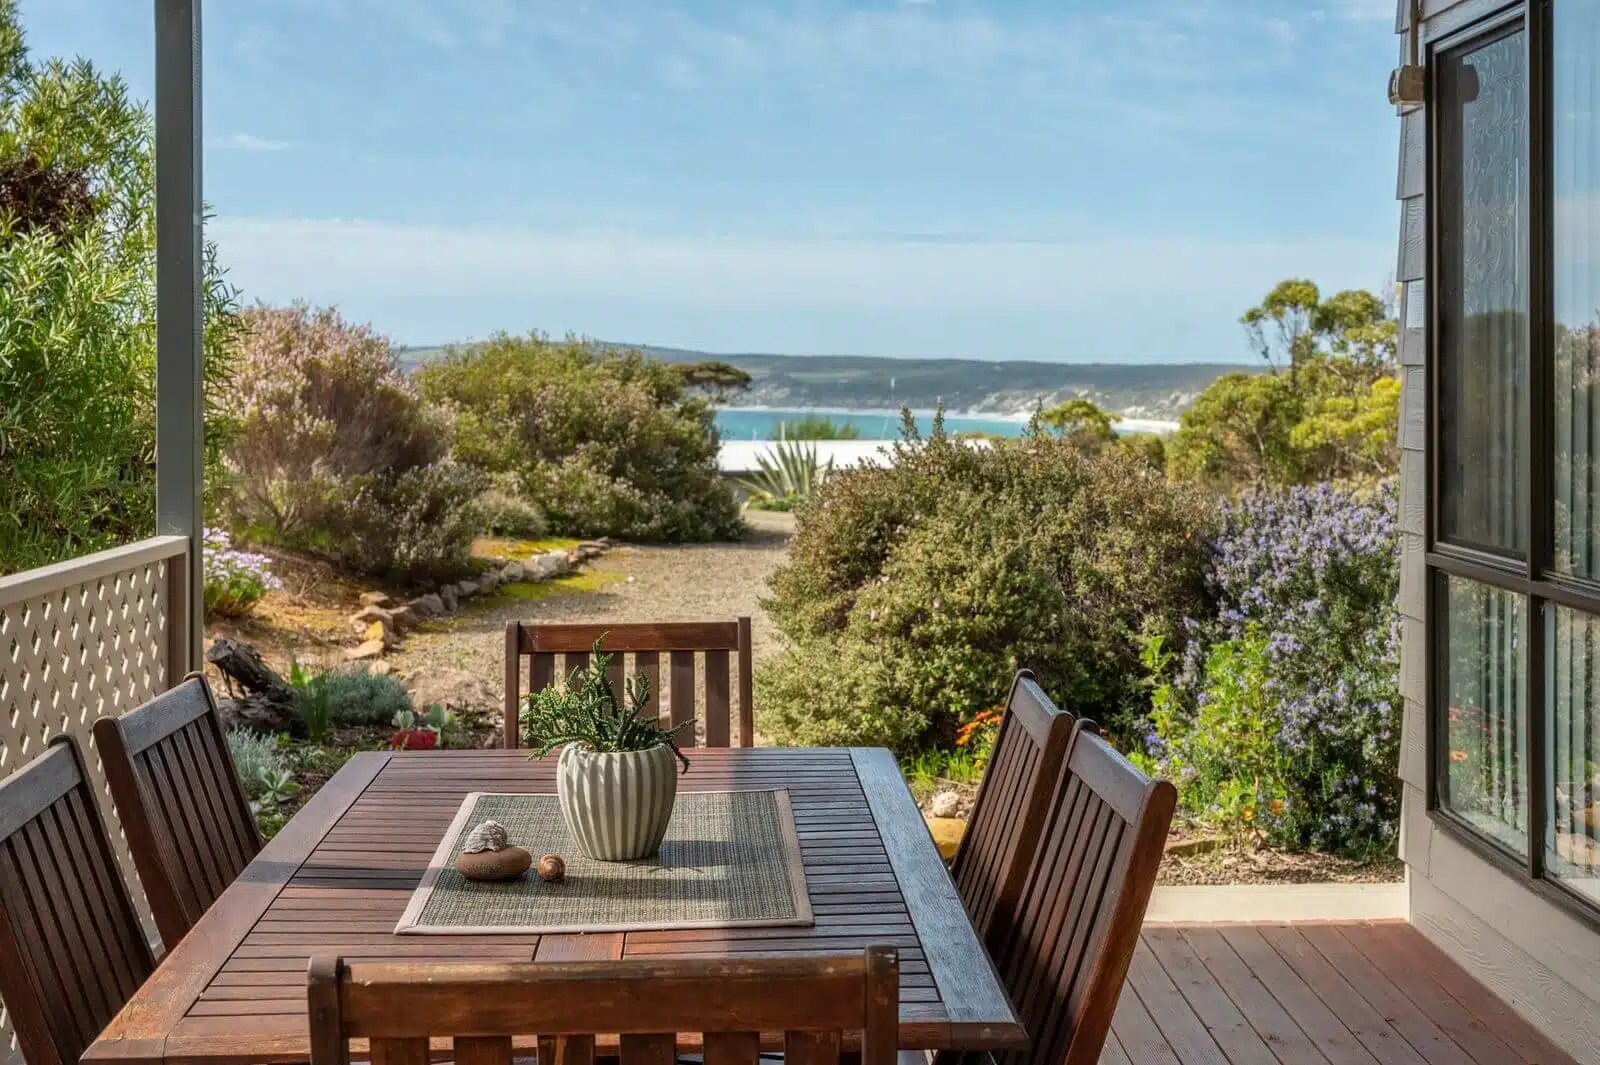 A serene patio at Shalom House, holiday home in Emu Bay, Kangaroo Island with comfortable outdoor furniture surrounded by birds chirping and koalas in the trees, overlooking a tranquil bay.